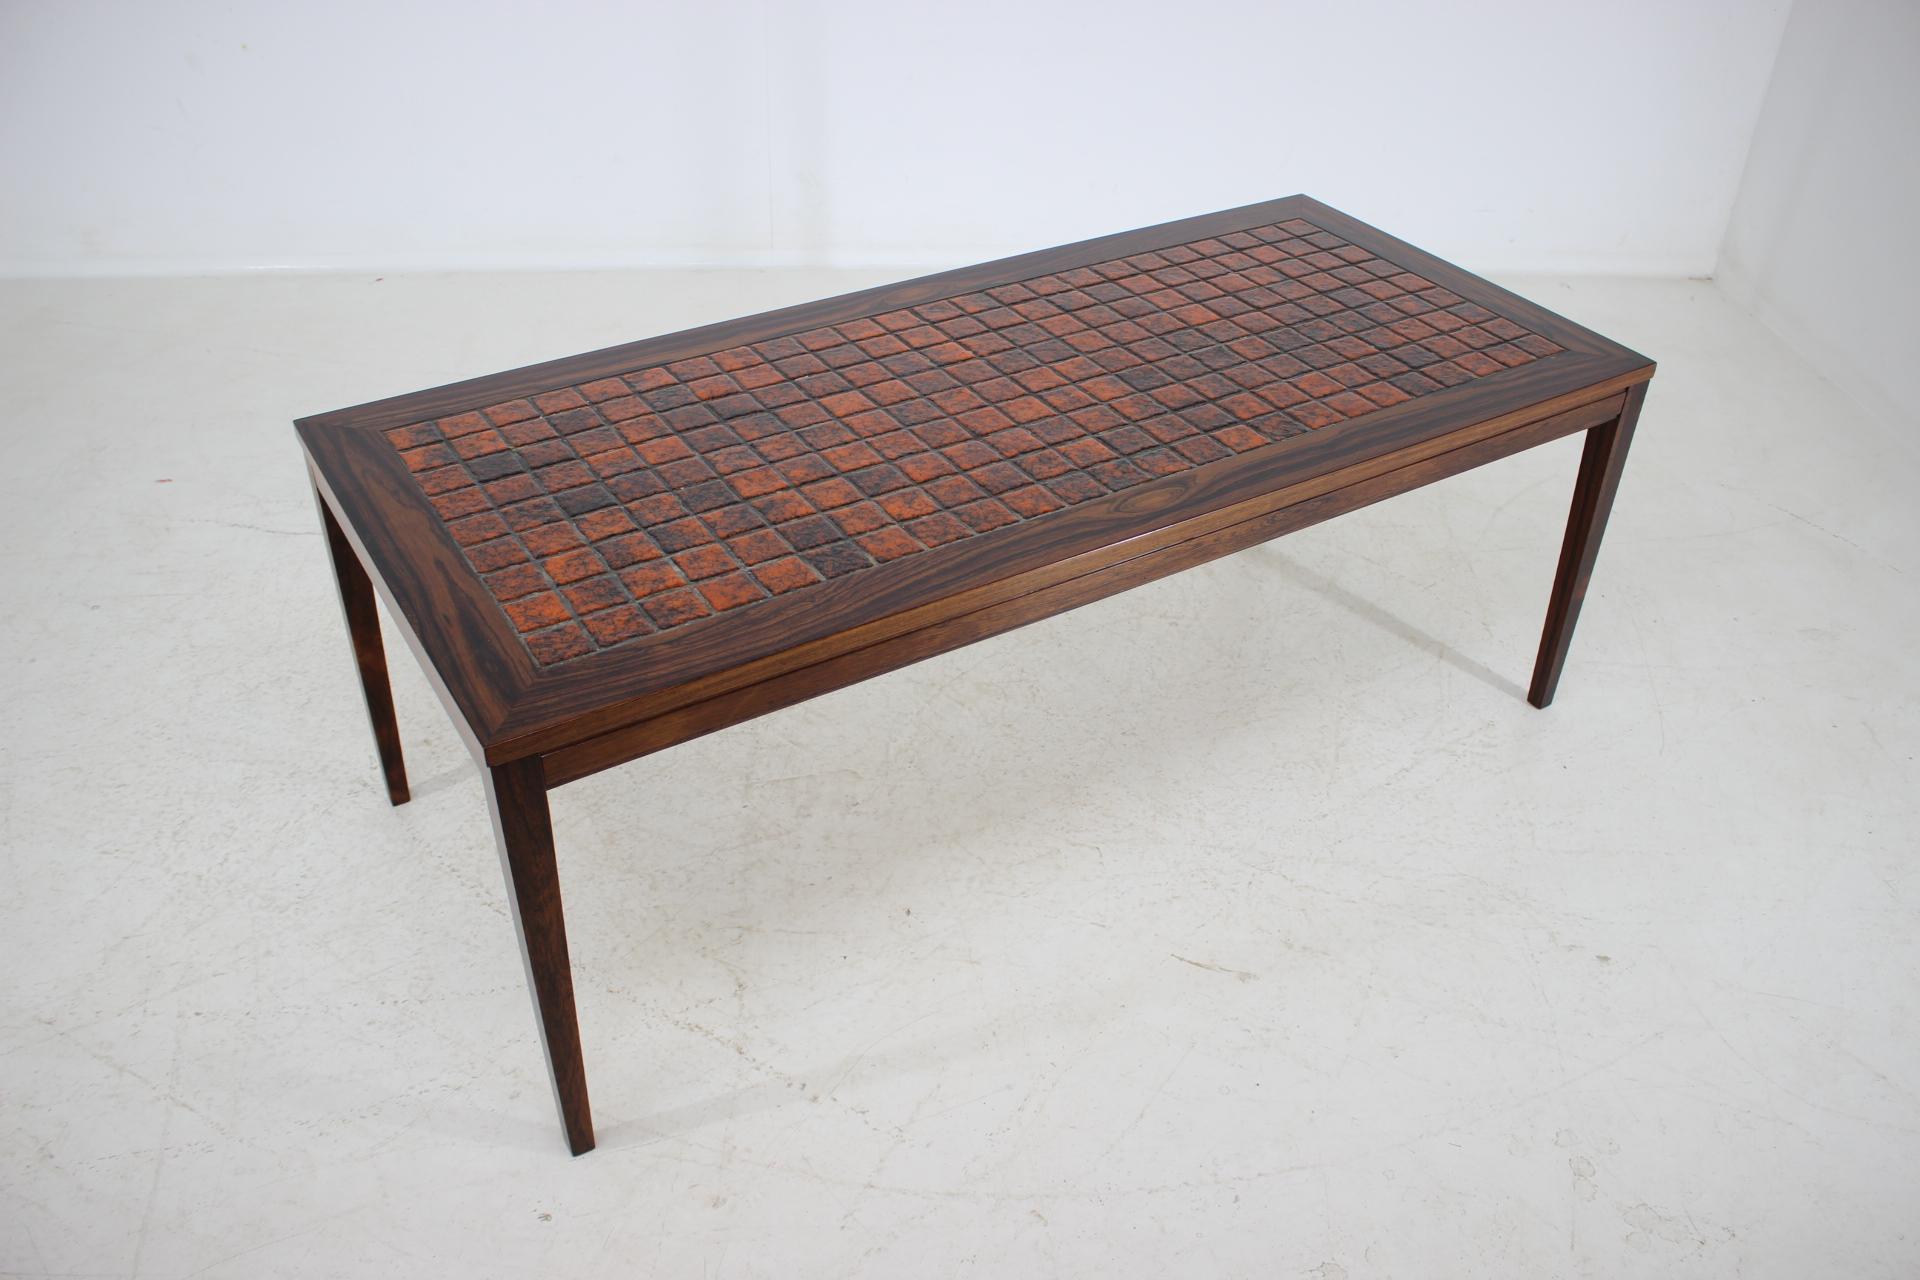 1960 Palisander and Tile Coffee Table, Denmark 1